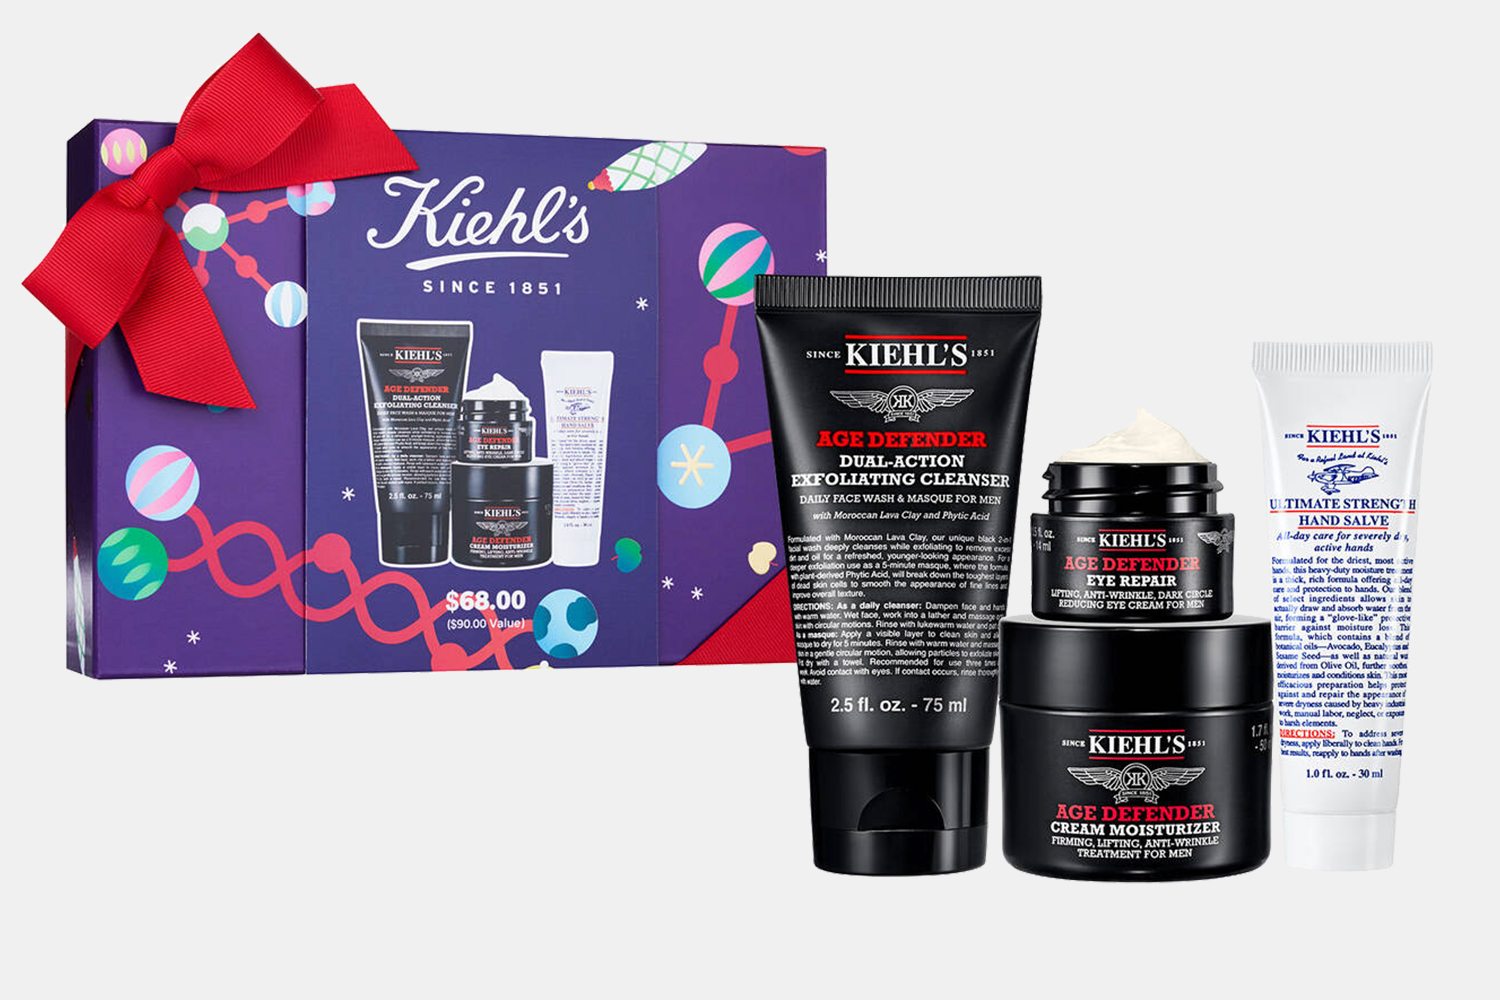 Kiehl's Gift Sets Offer the Best Grooming Bargain This Holiday Season